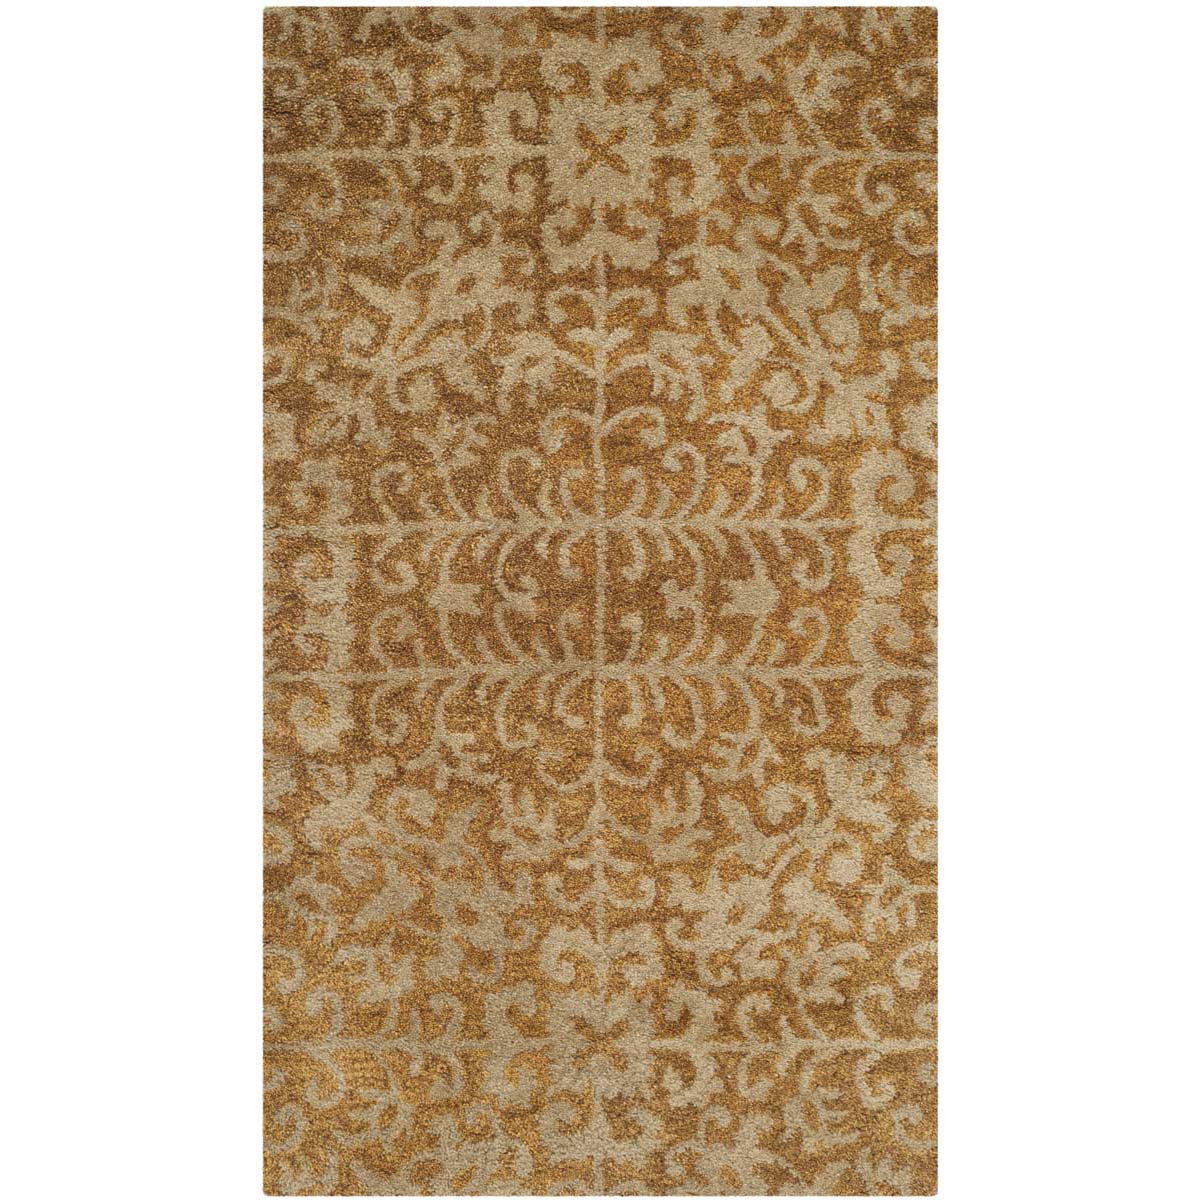 Safavieh Antiquity 11A Rug, AT411A - Gold / Beige